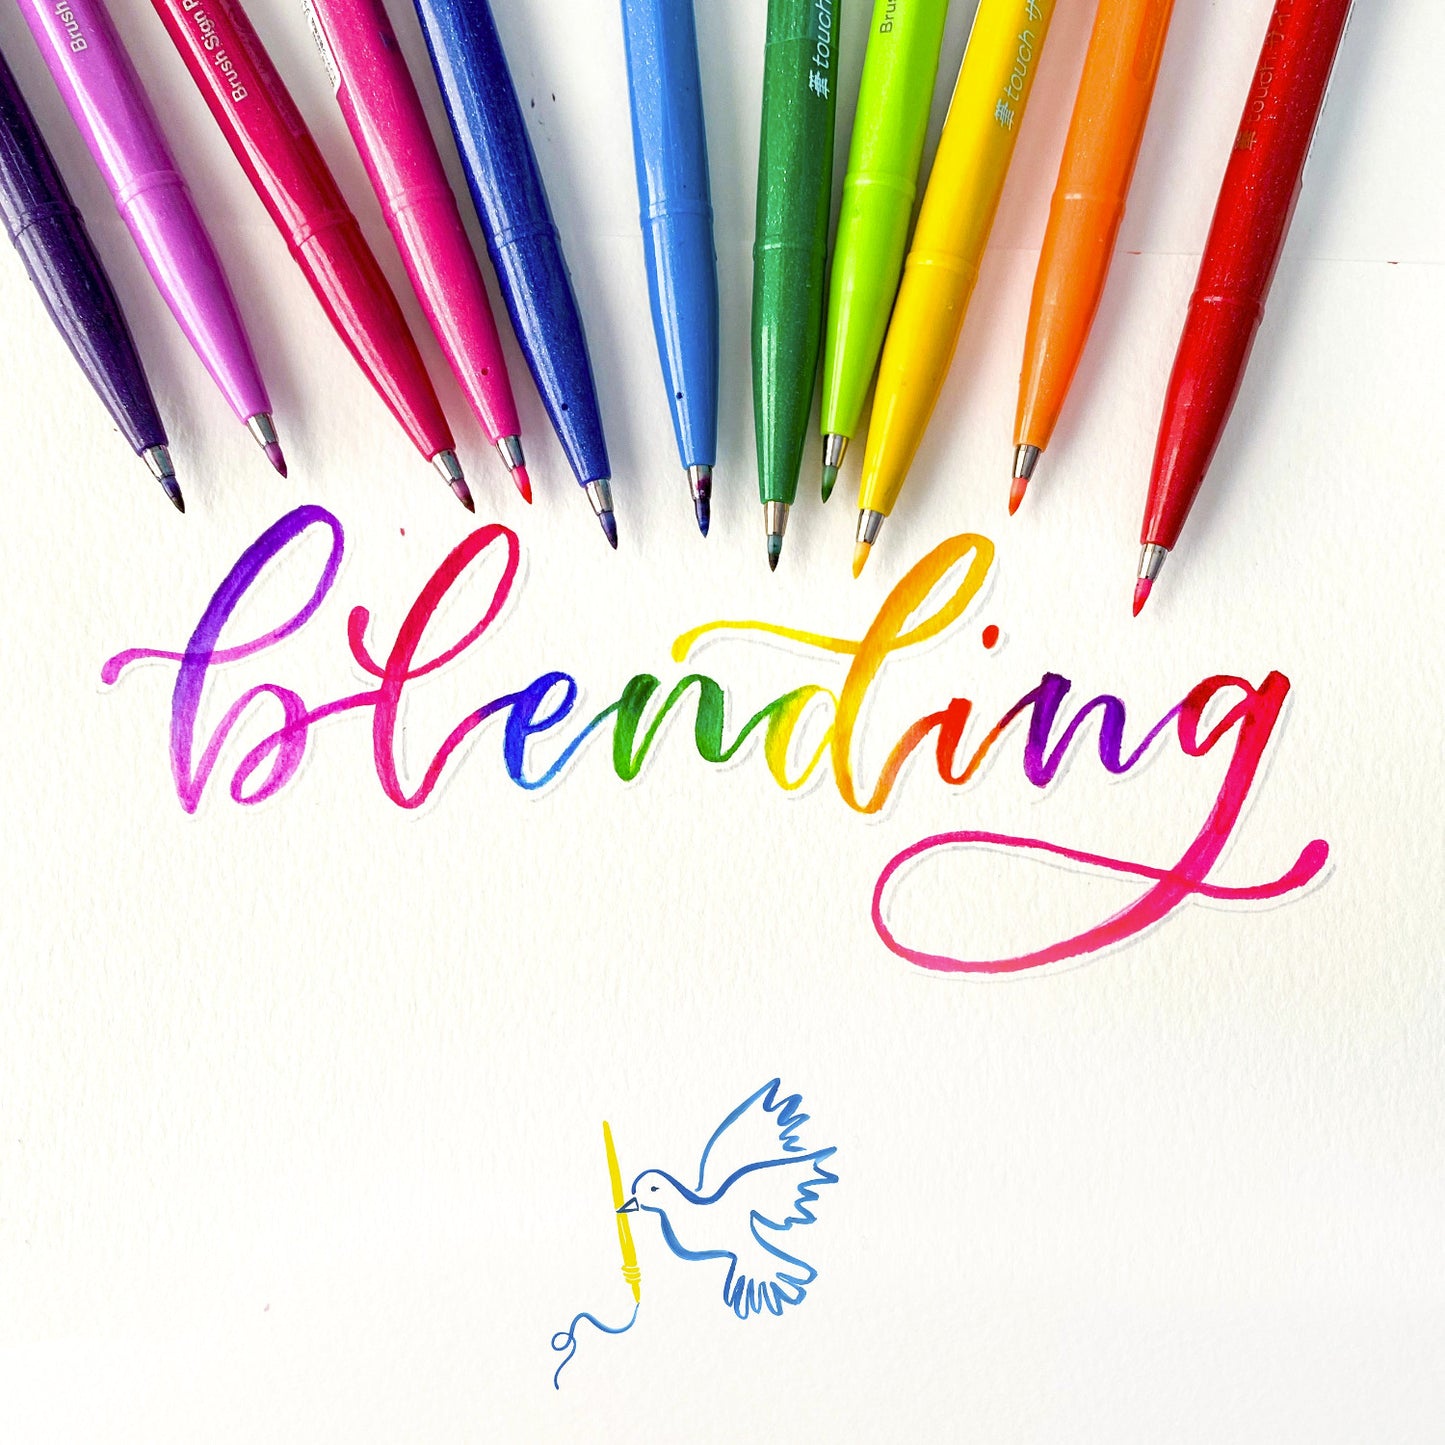 31 March 2022 - Brush Lettering Workshop in aid of the Ukraine Crisis